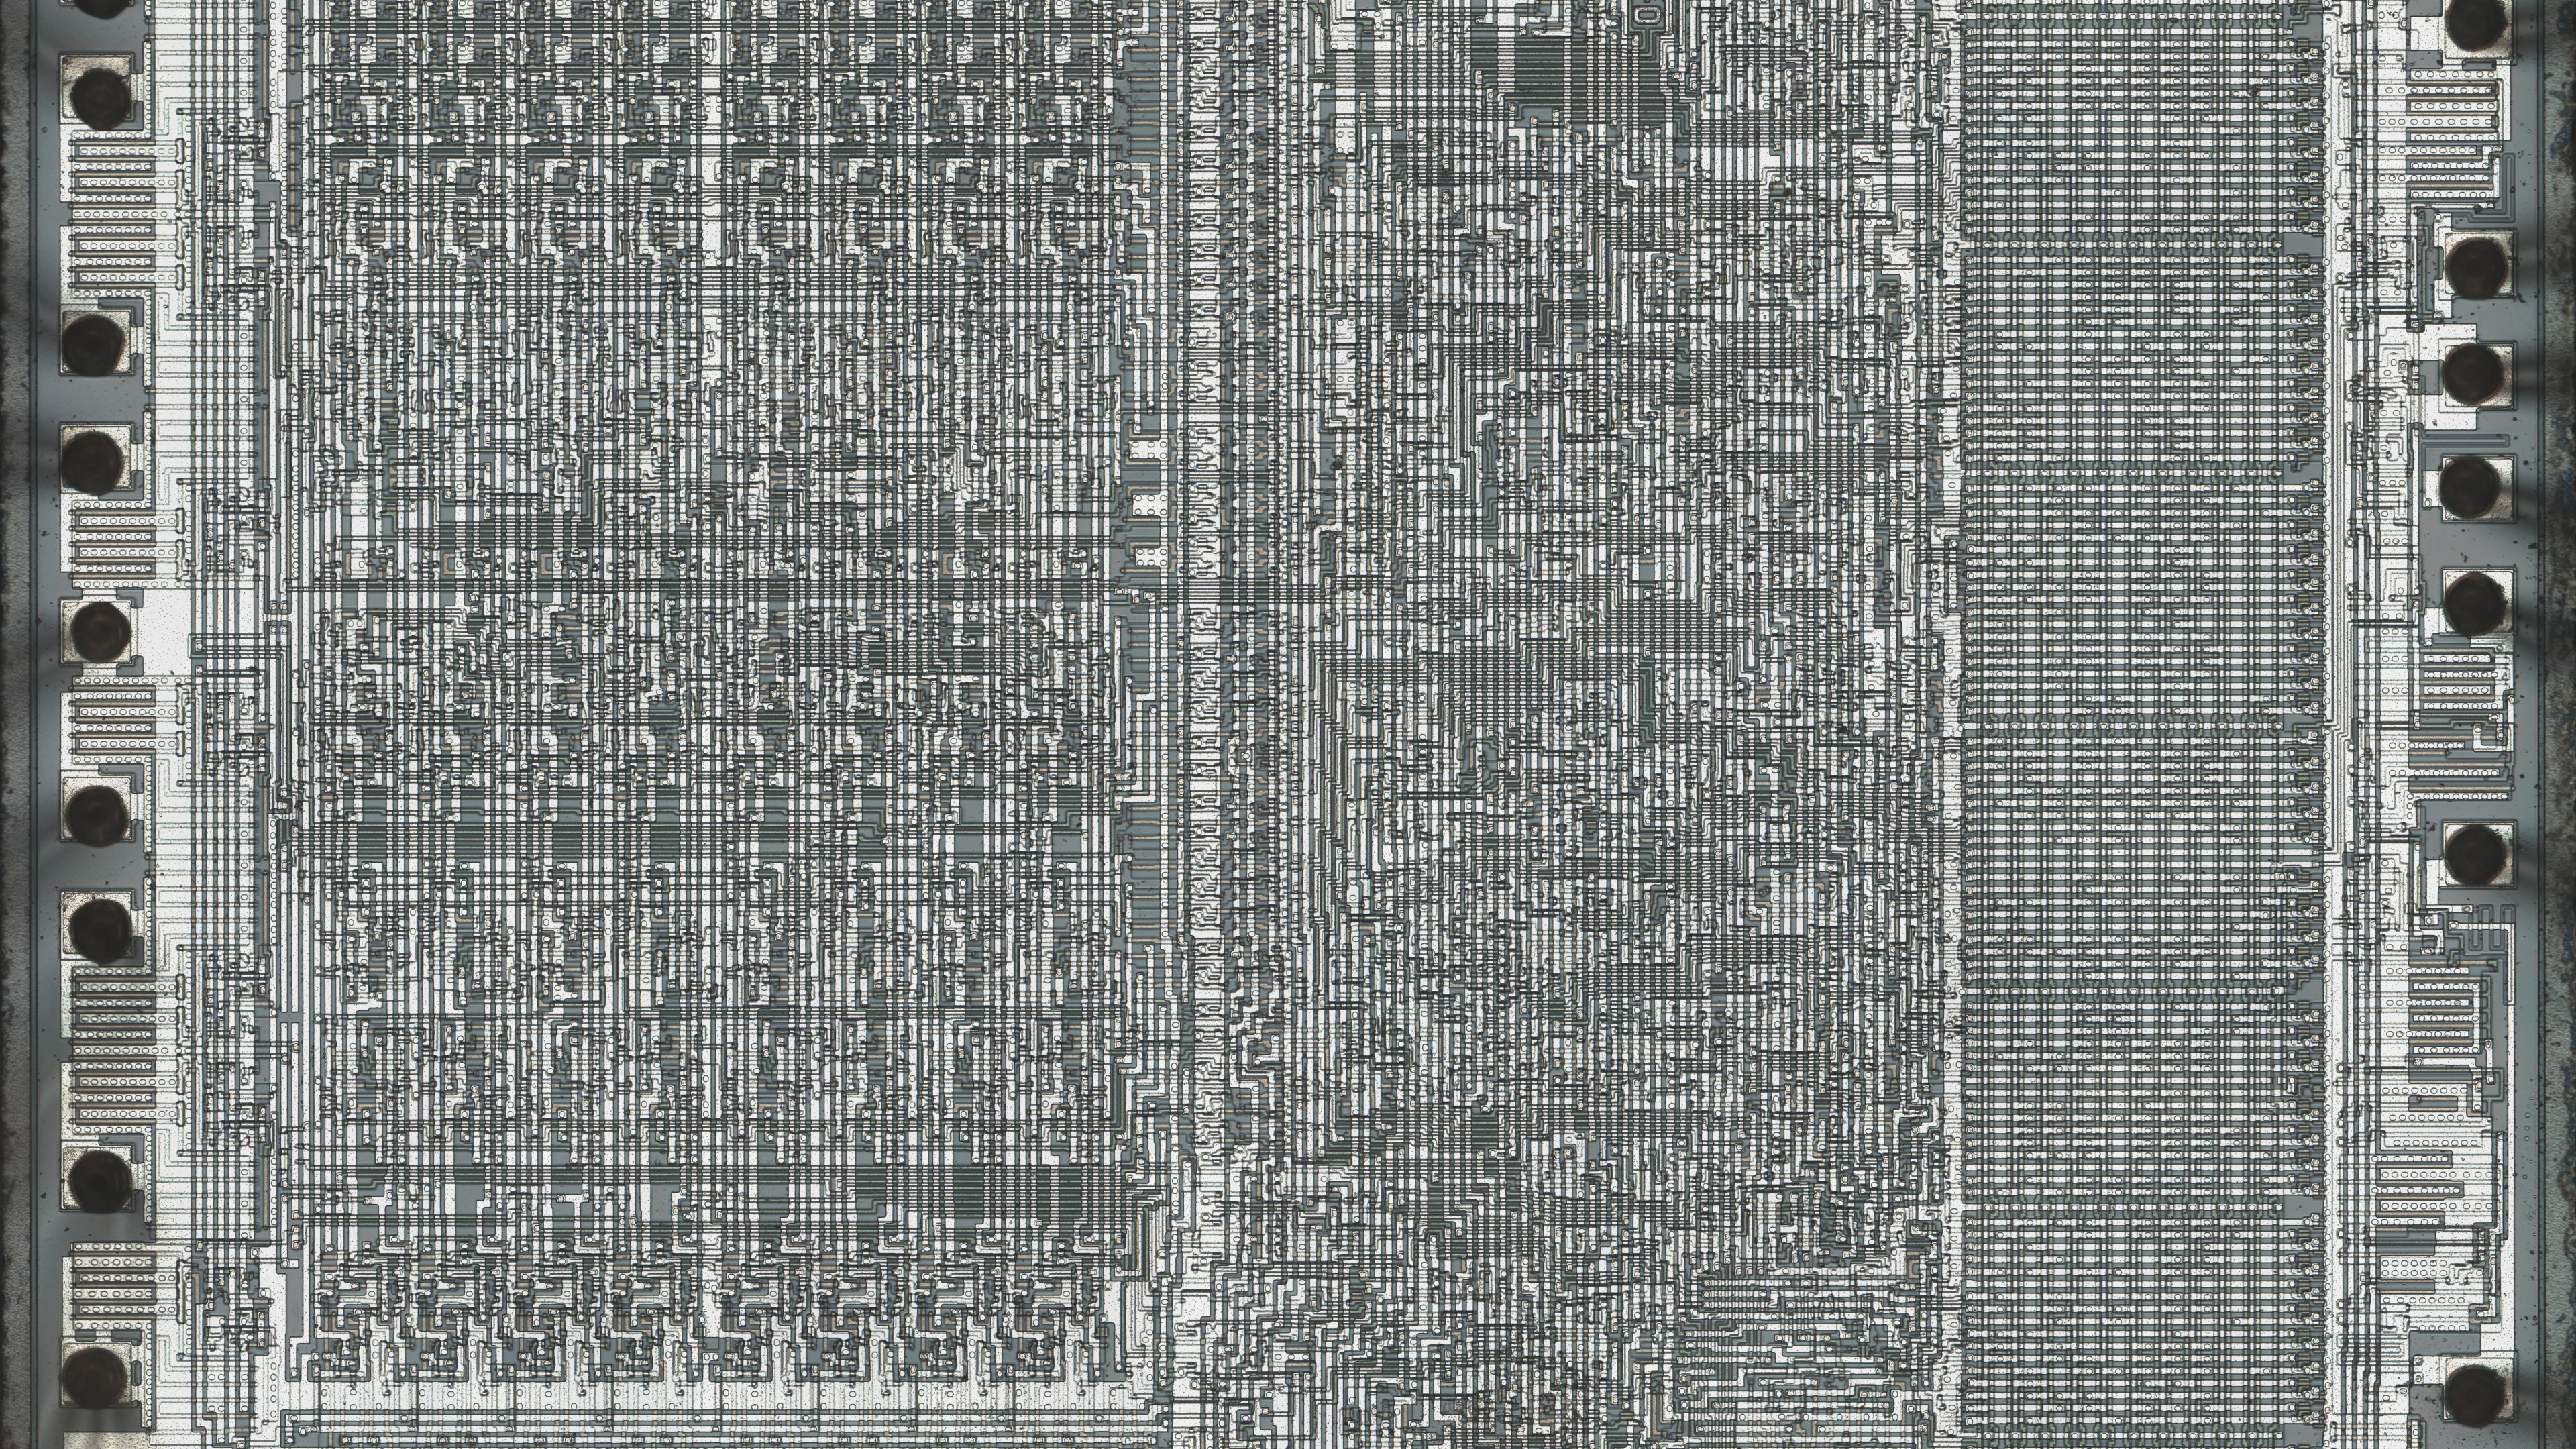 Integrated Circuits CPU MOS 6502 Electronics Microscopic Technology 3840x2160